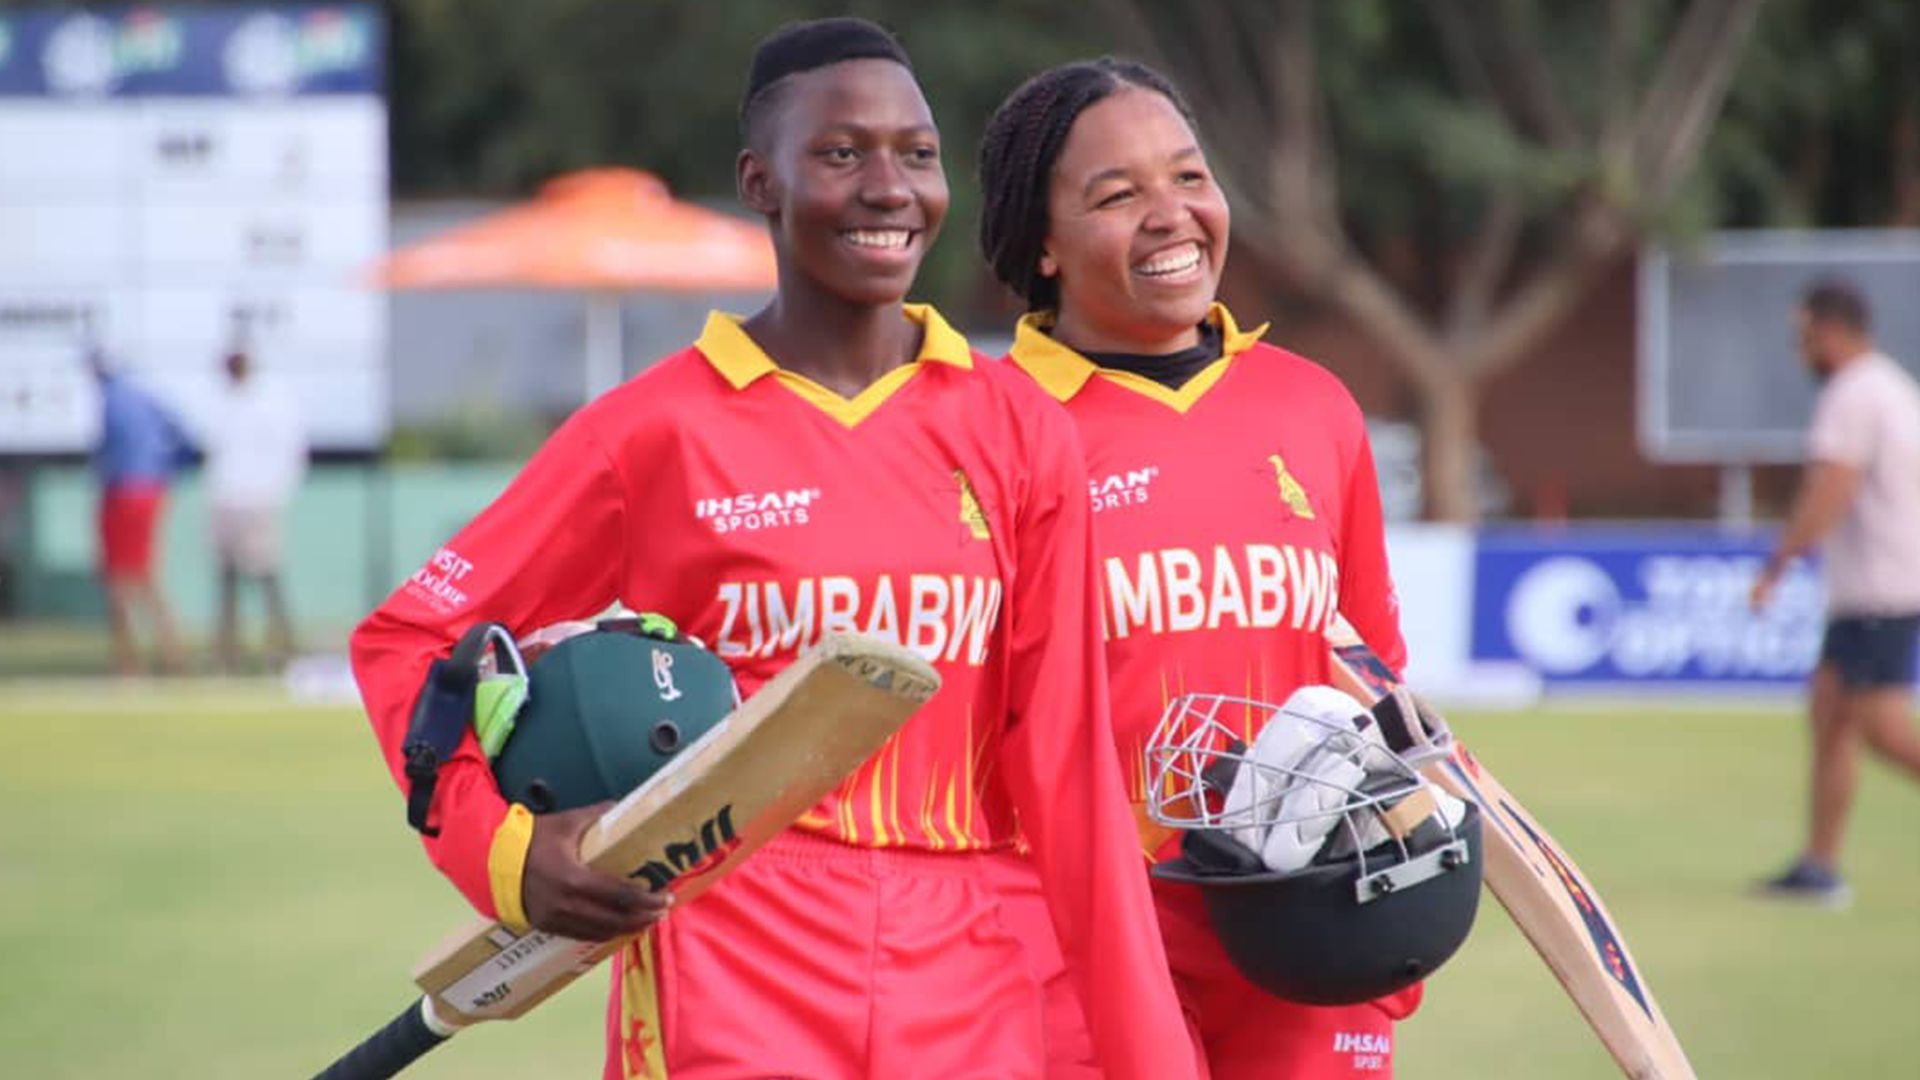 Zimbabwe Women got off to a winning start to the T20I series (Image Courtesy: ICC Cricket)